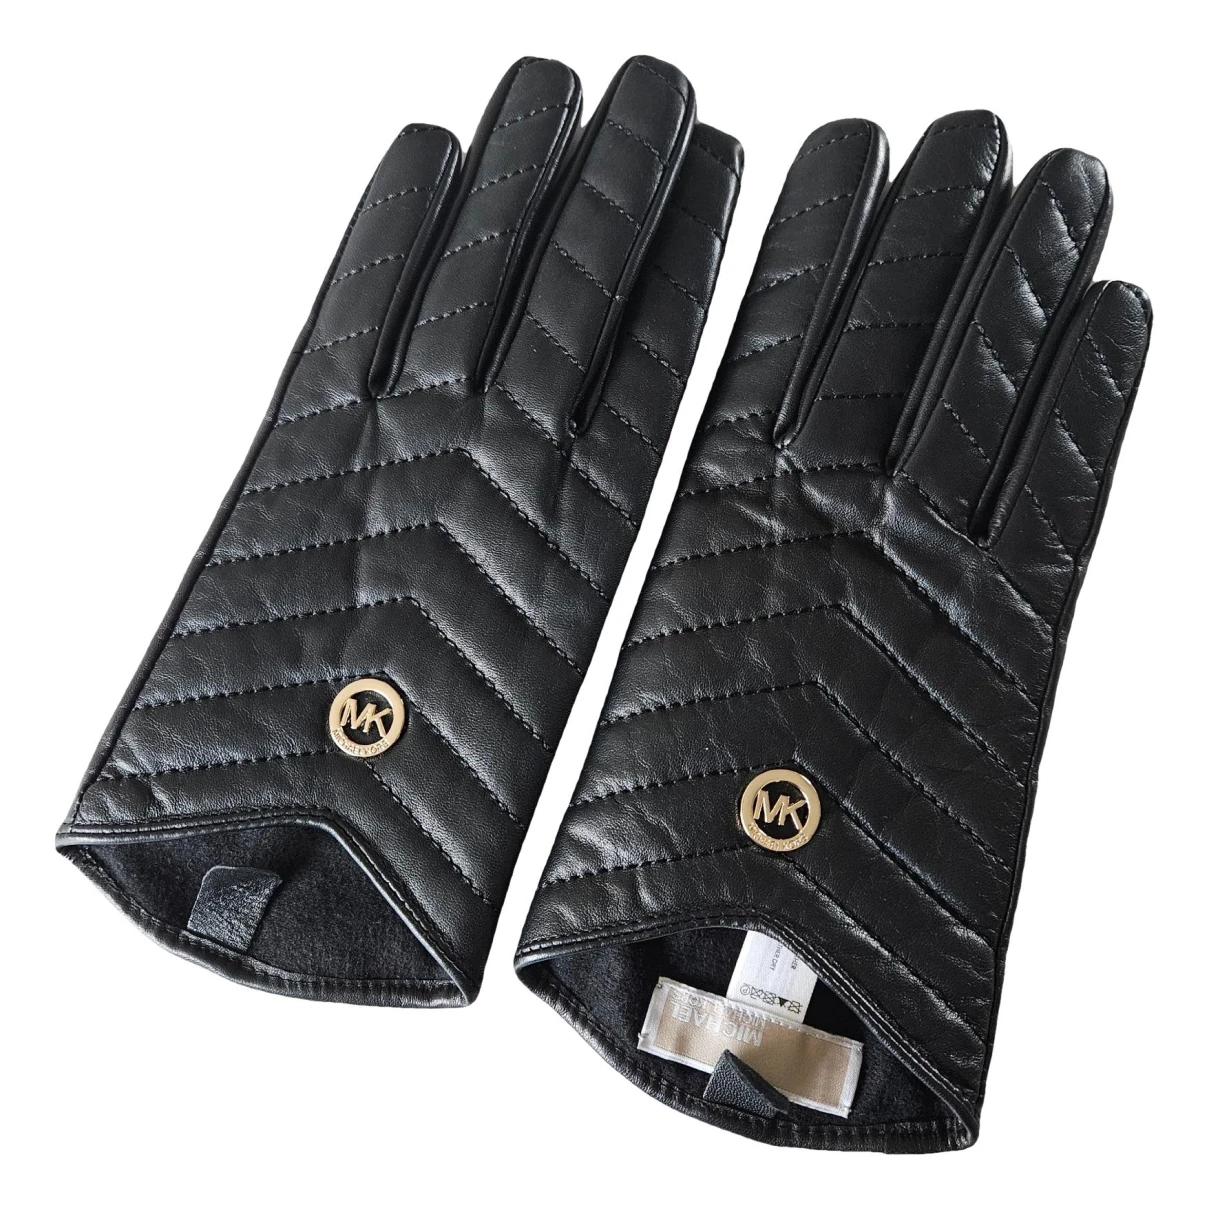 accessories Michael Kors gloves for Female Leather L International. Used condition